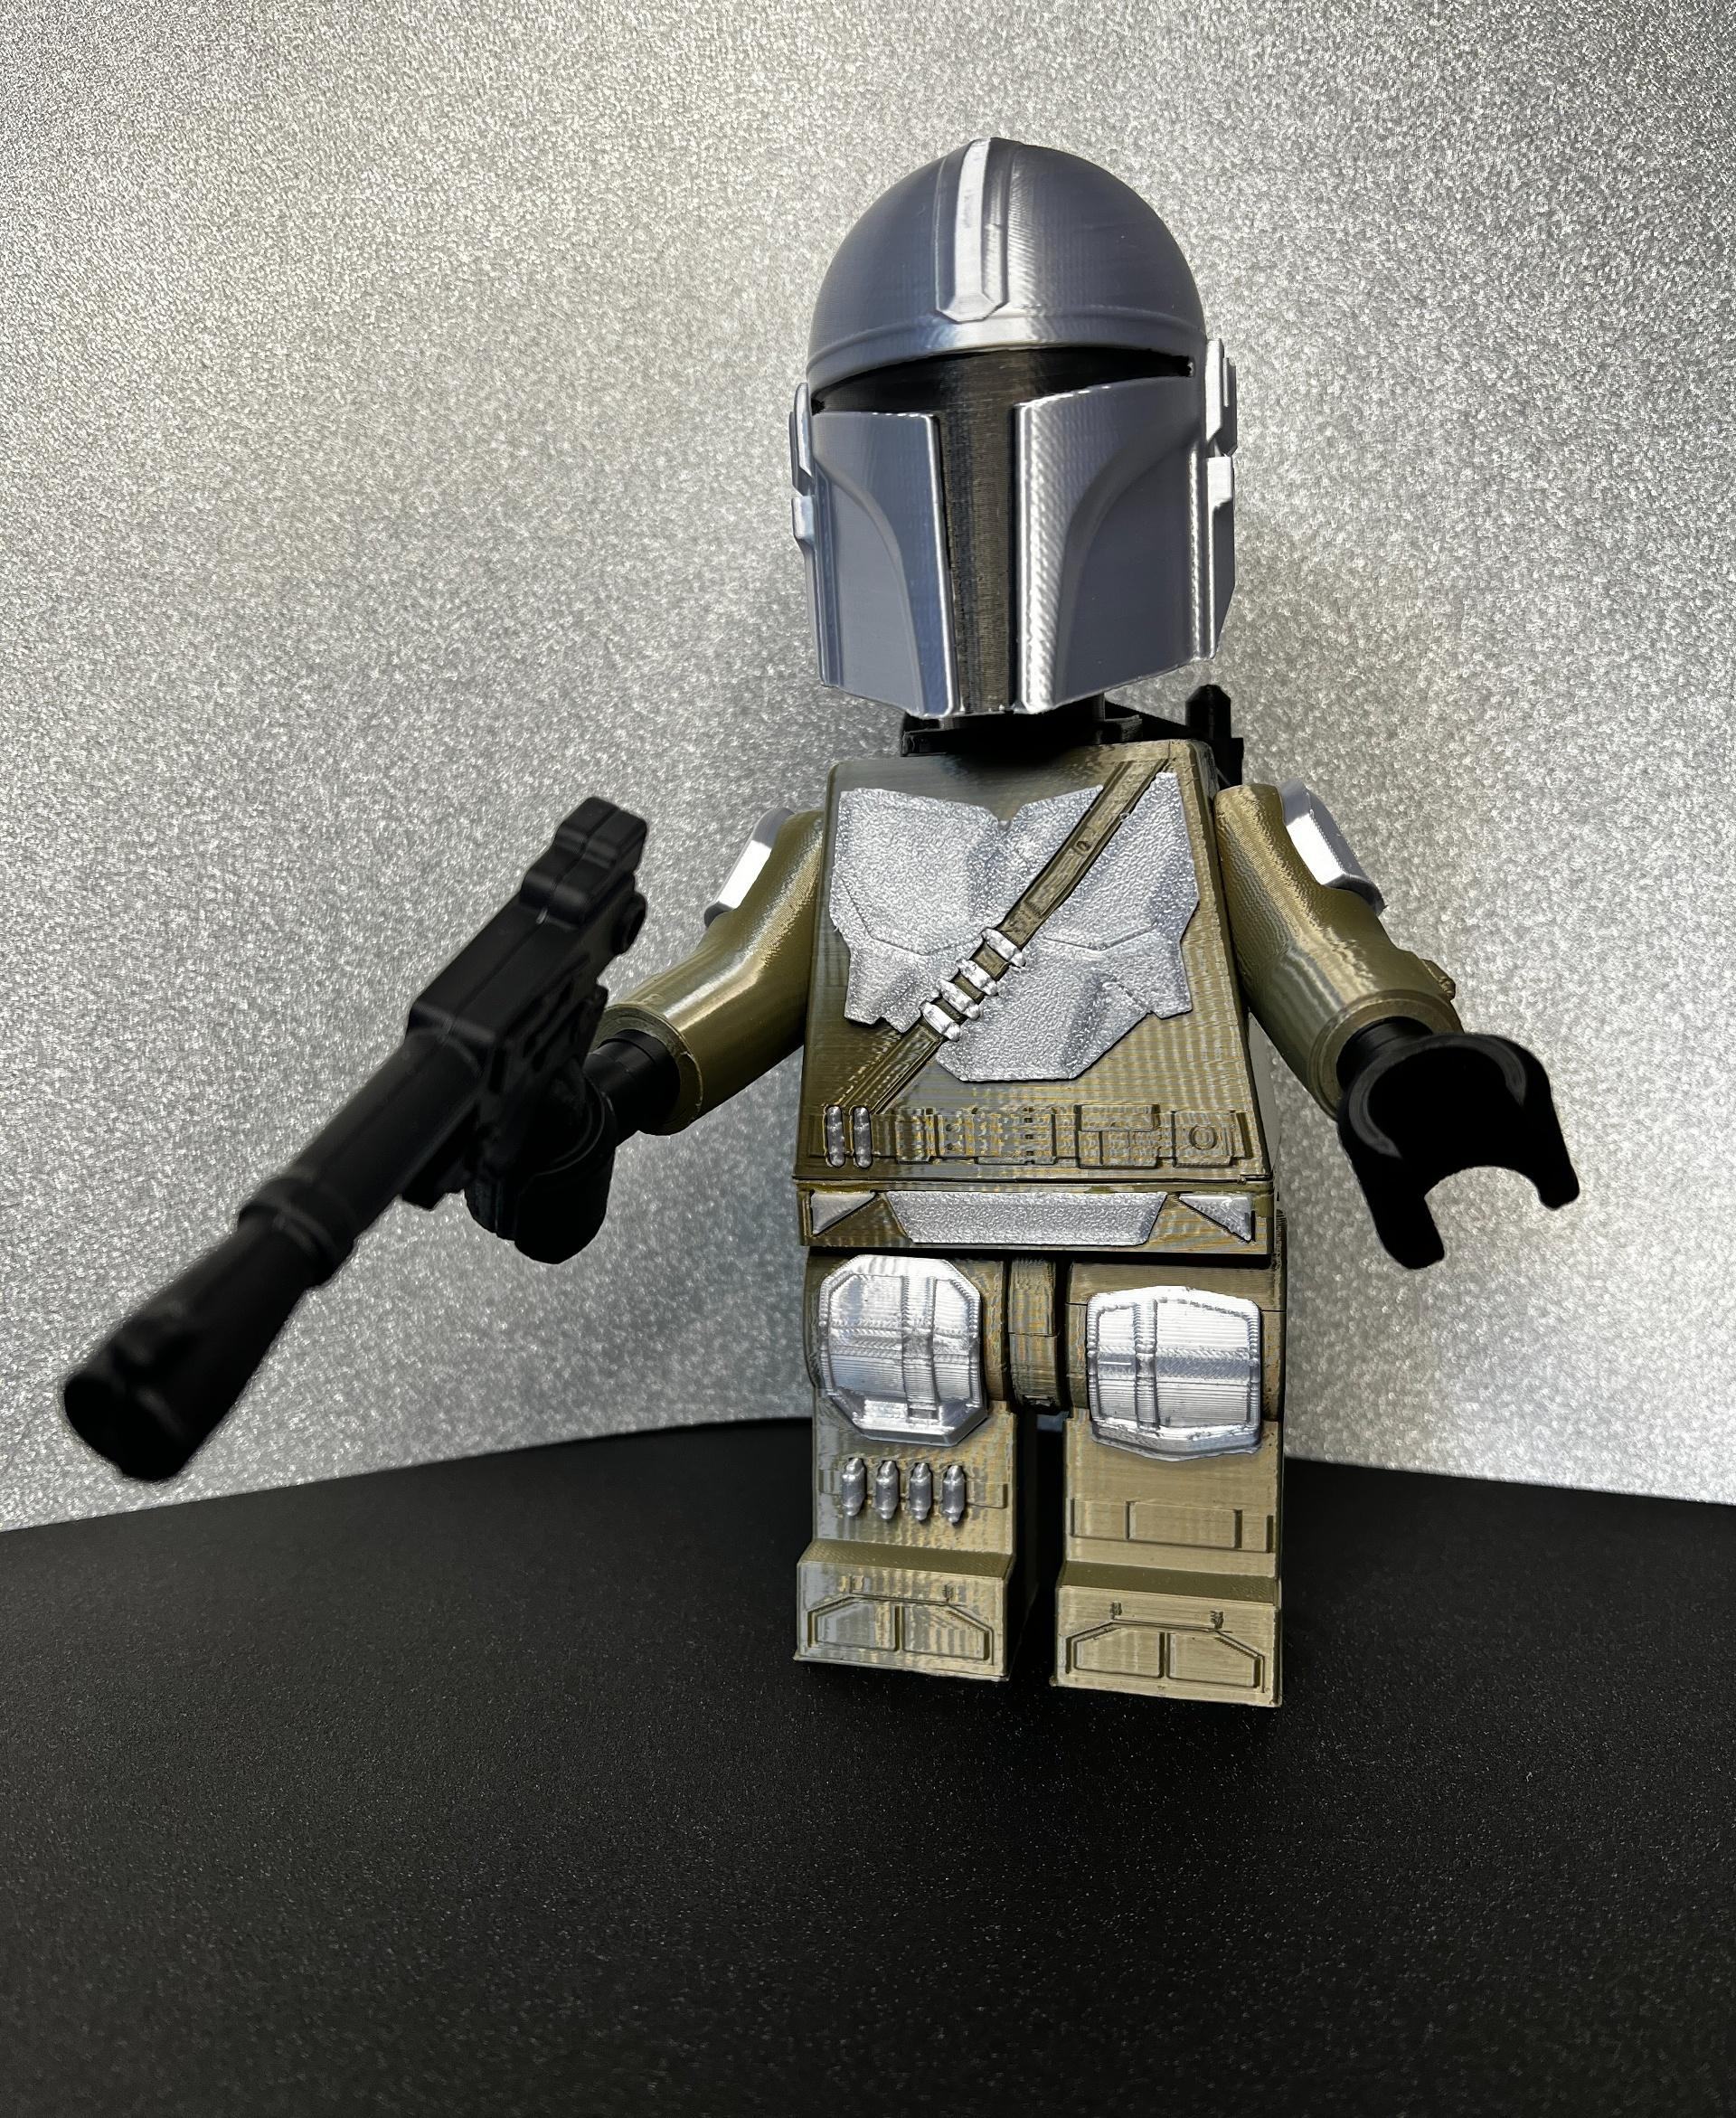 The Mandalorian (6:1 LEGO-inspired brick figure, NO MMU/AMS, NO supports, NO glue) - tried some steam punk color i had for this - 3d model